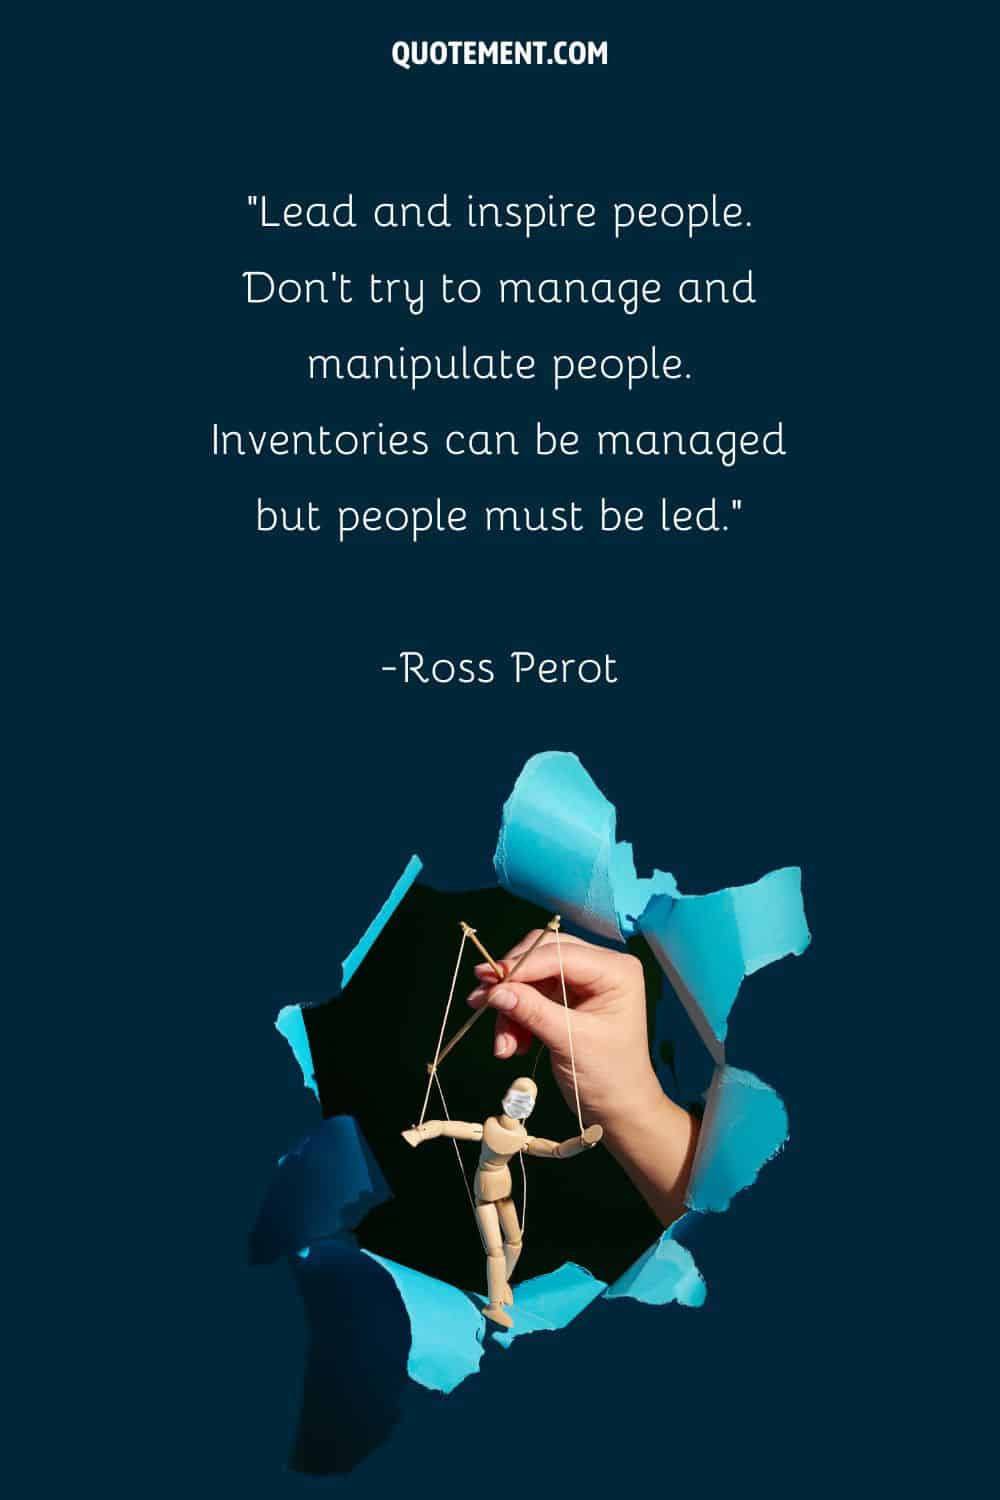 image of a marionette representing quote on leading and manipulation